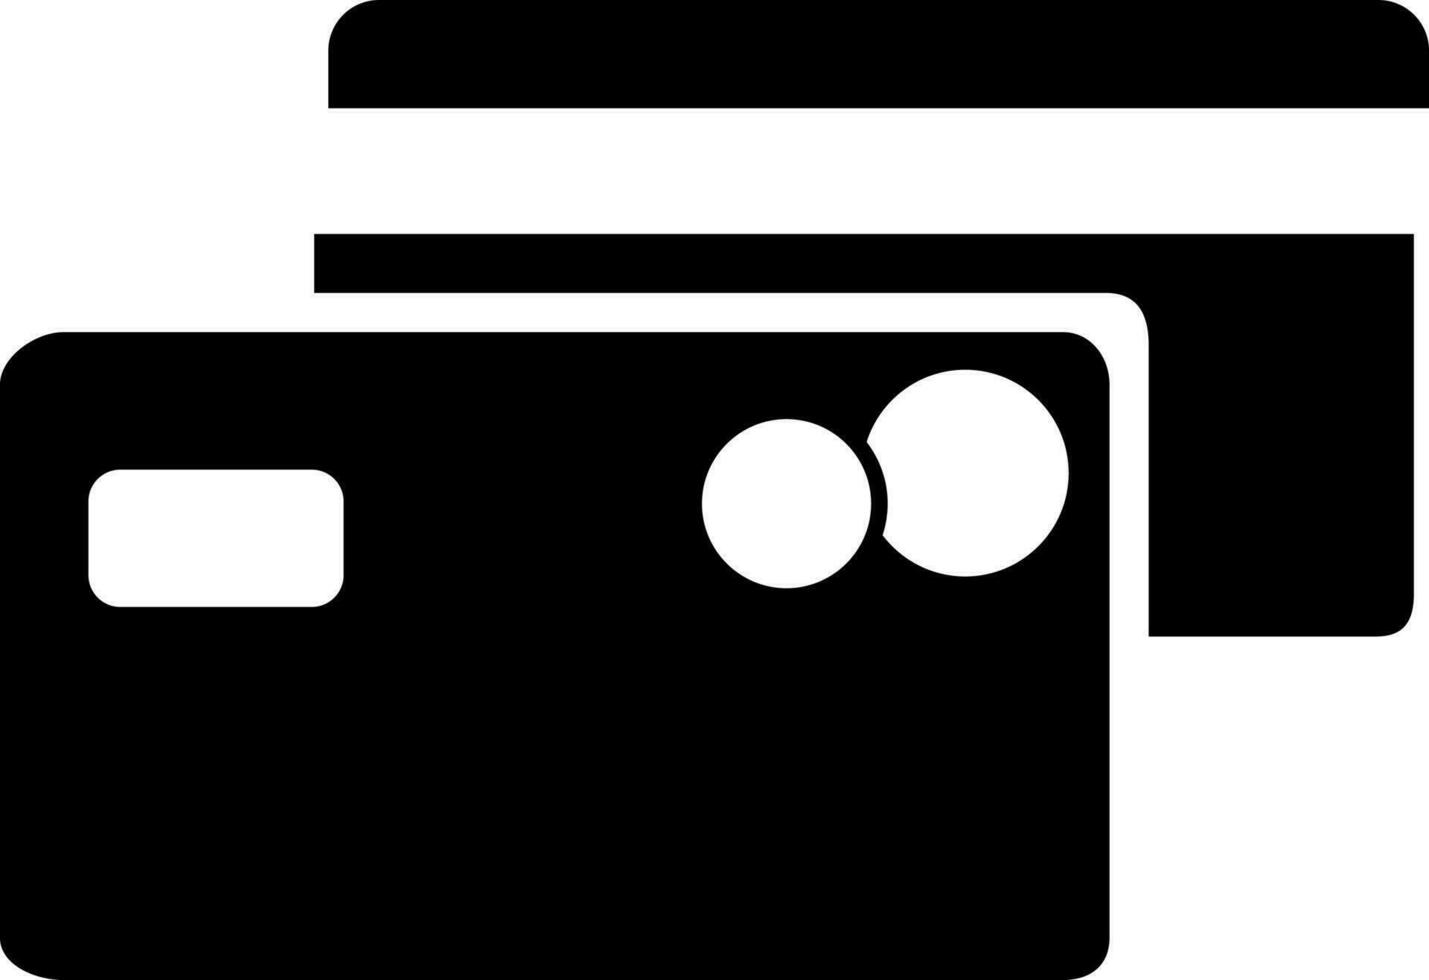 black and white credit card in flat style. vector